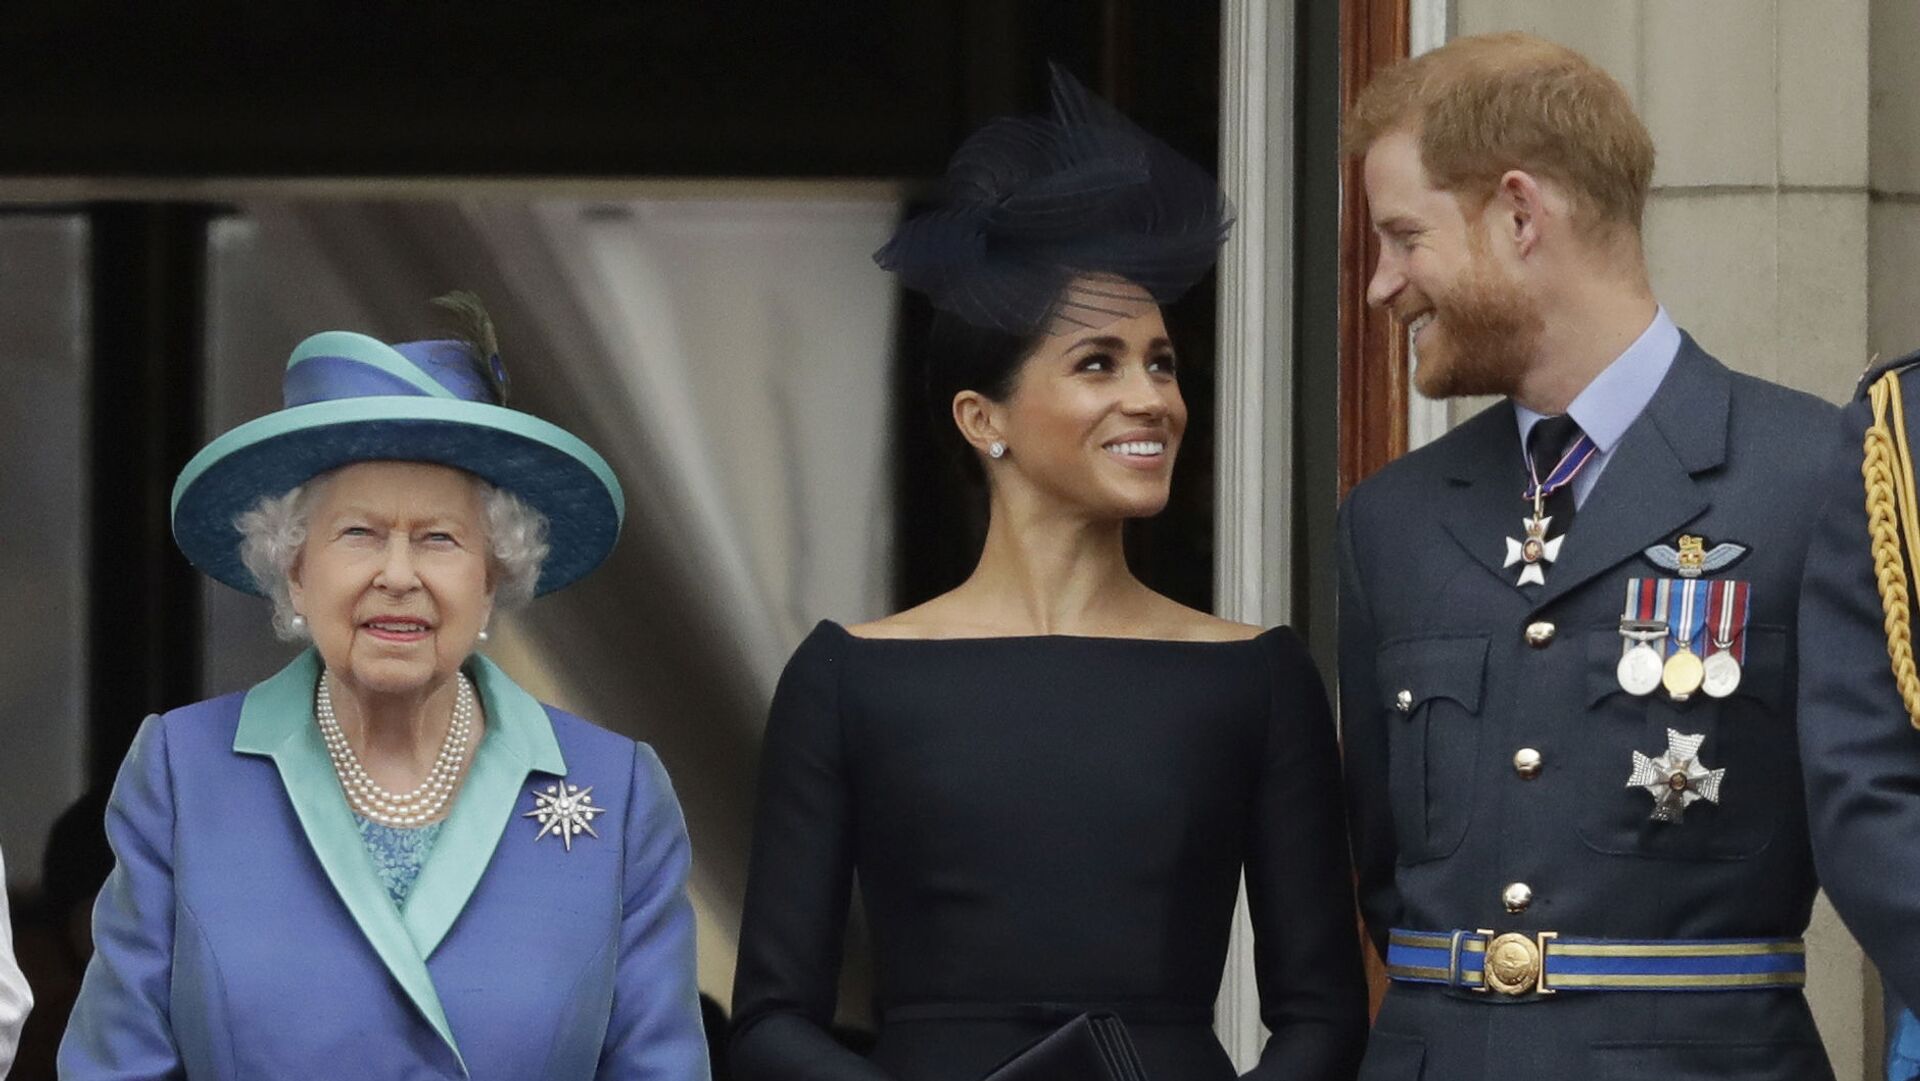 In this 10 July 2018 file photo, Britain's Queen Elizabeth II, Meghan the Duchess of Sussex and Prince Harry watch a flypast of Royal Air Force aircraft pass over Buckingham Palace in London. - Sputnik International, 1920, 09.06.2021